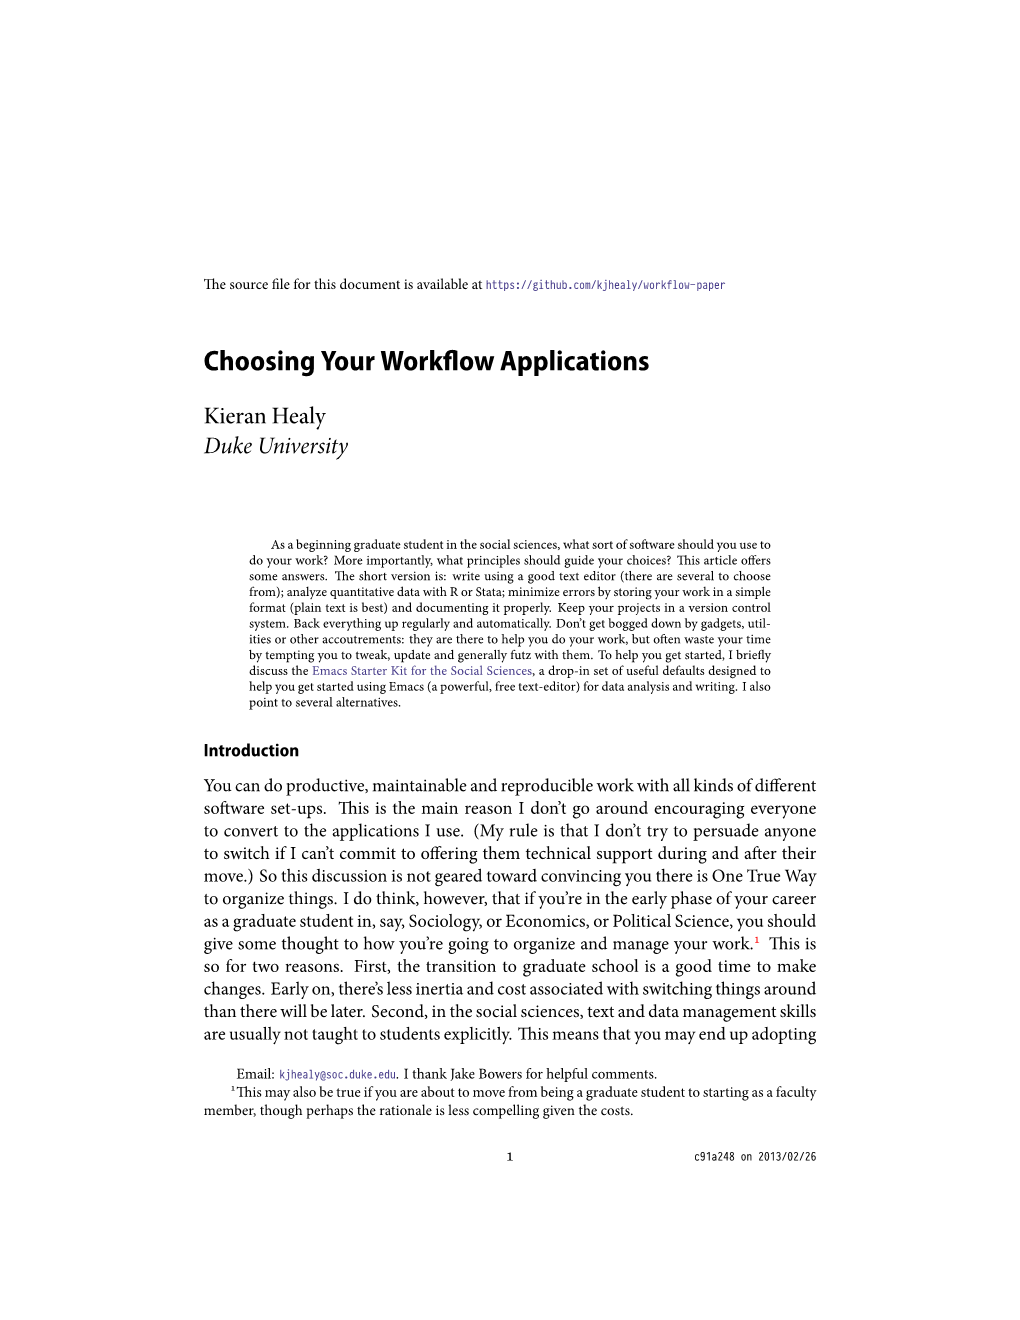 Choosing Your Work Ow Applications